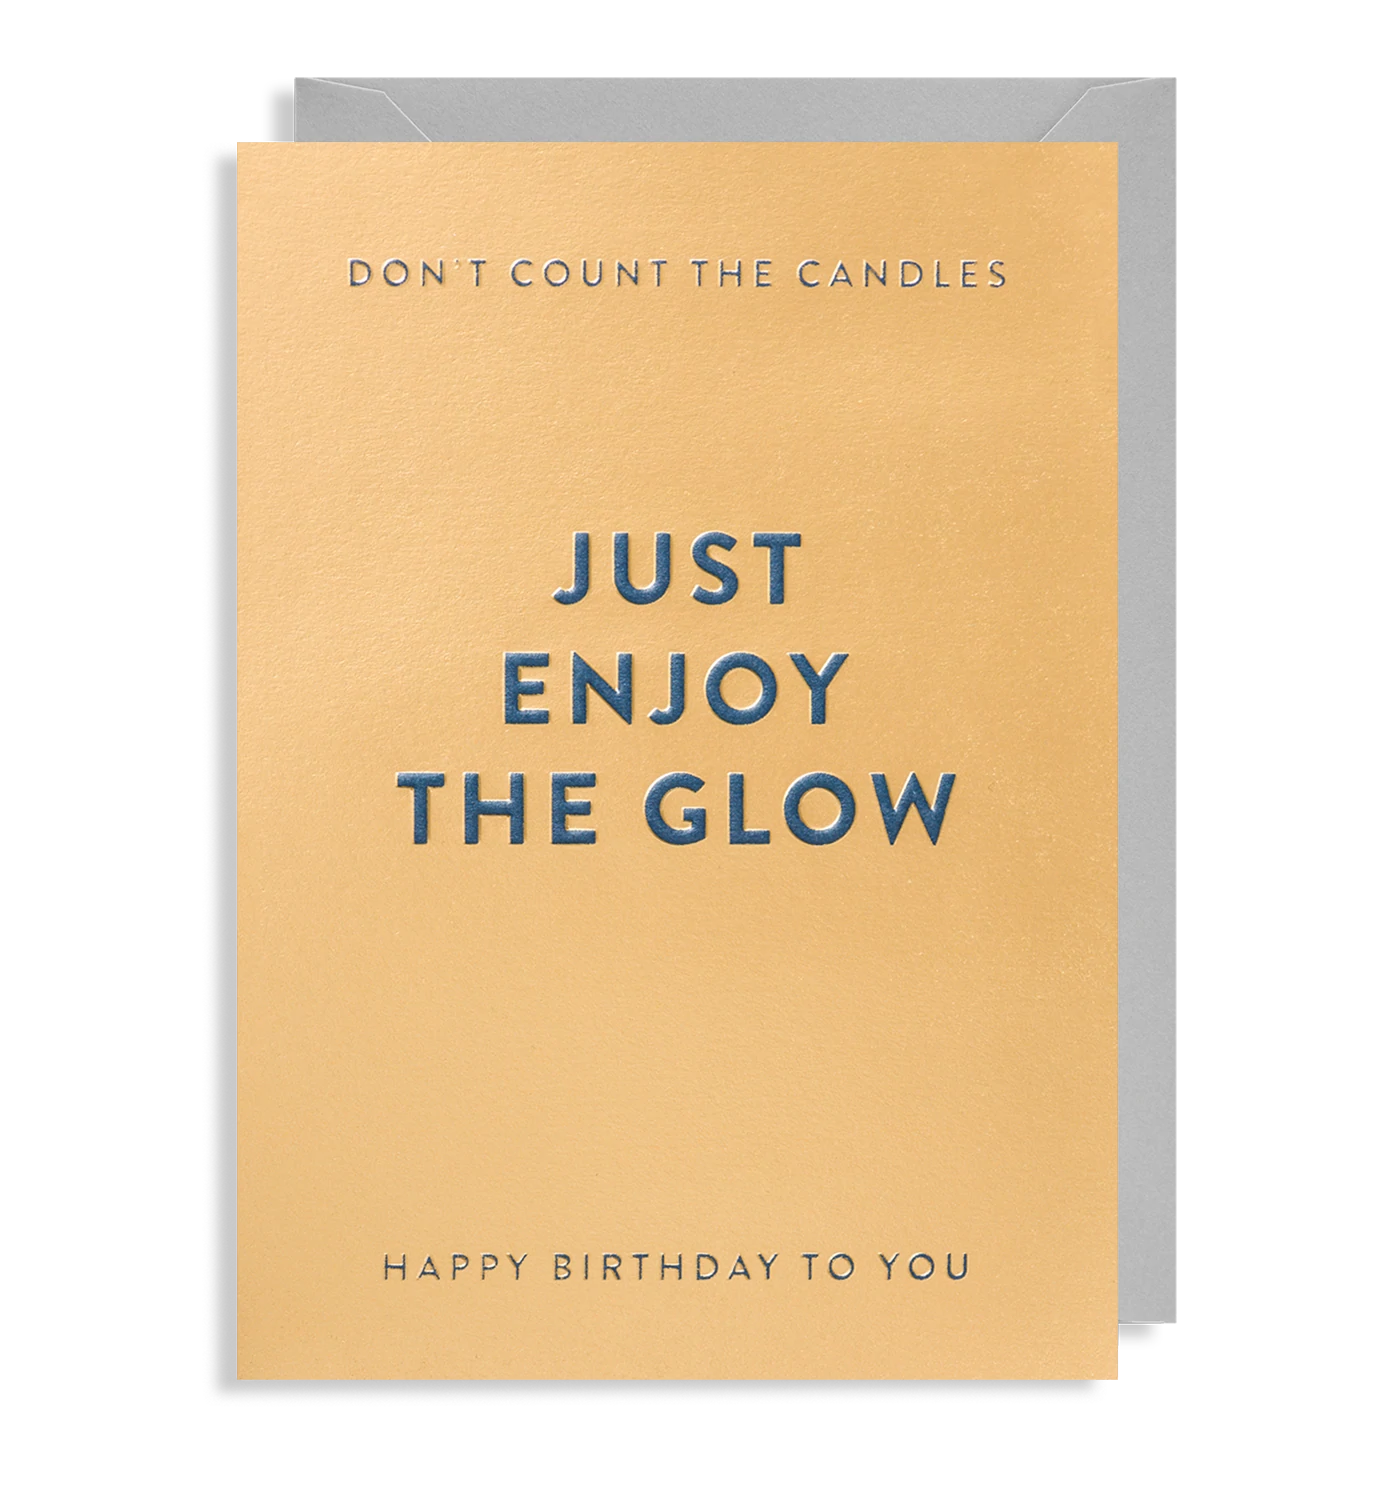 Don't Count The Candles, Enjoy The Glow Birthday Card